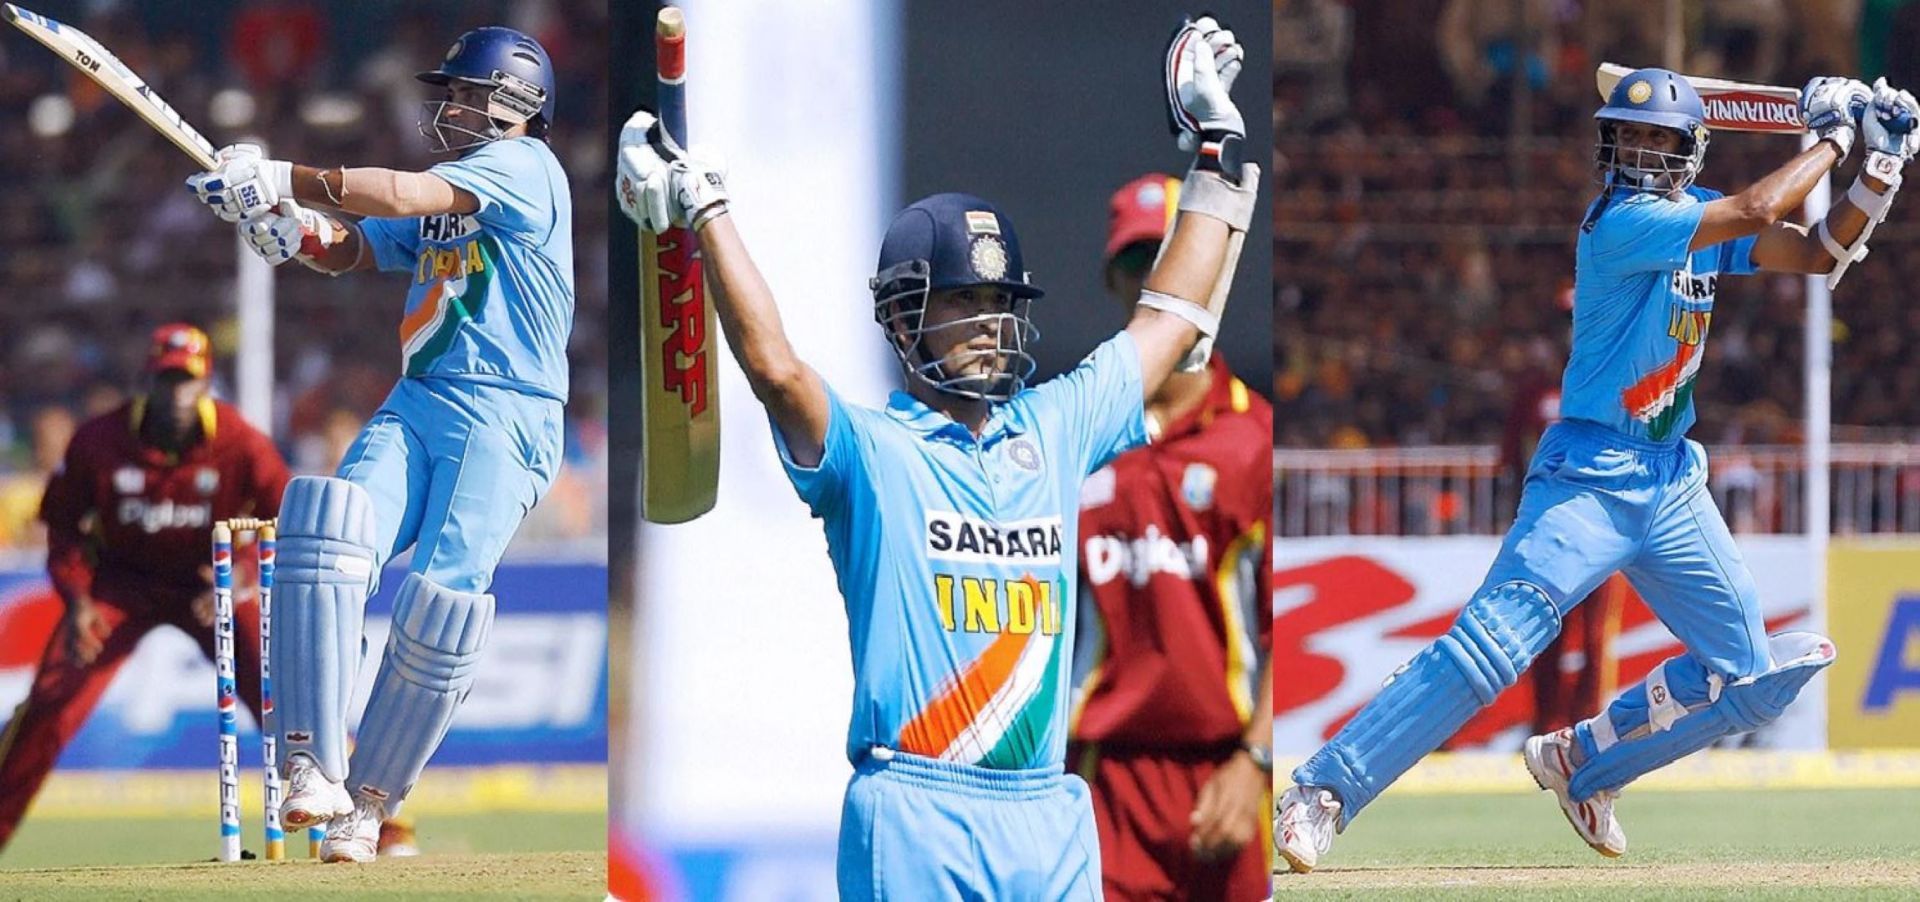 Tendulkar, Dravid, and Ganguly were at it again as India won the home series against West Indies.